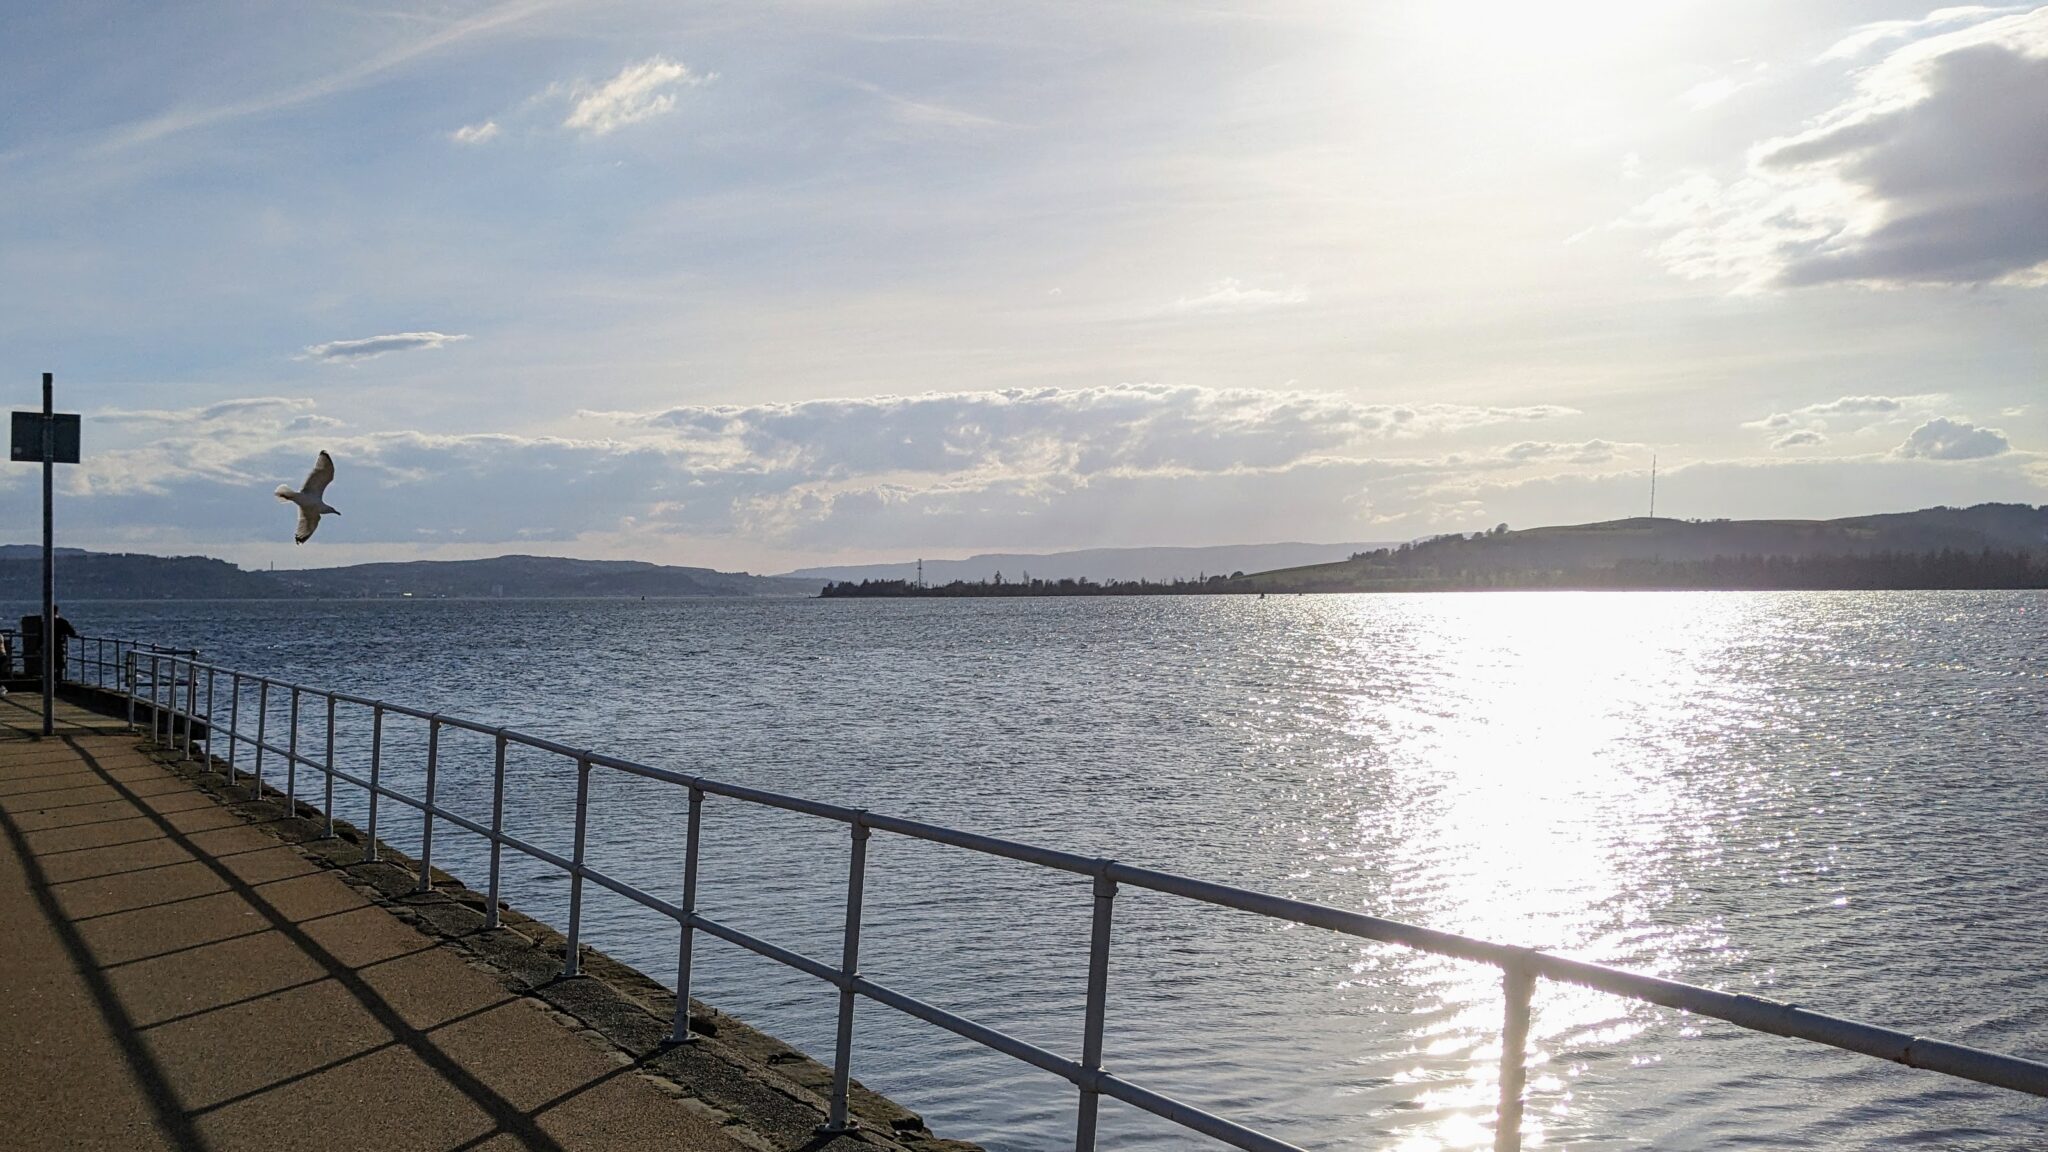 A seagull swooping by Helensburgh Pier late on a sunny day. In the background is Rosneath peninsula